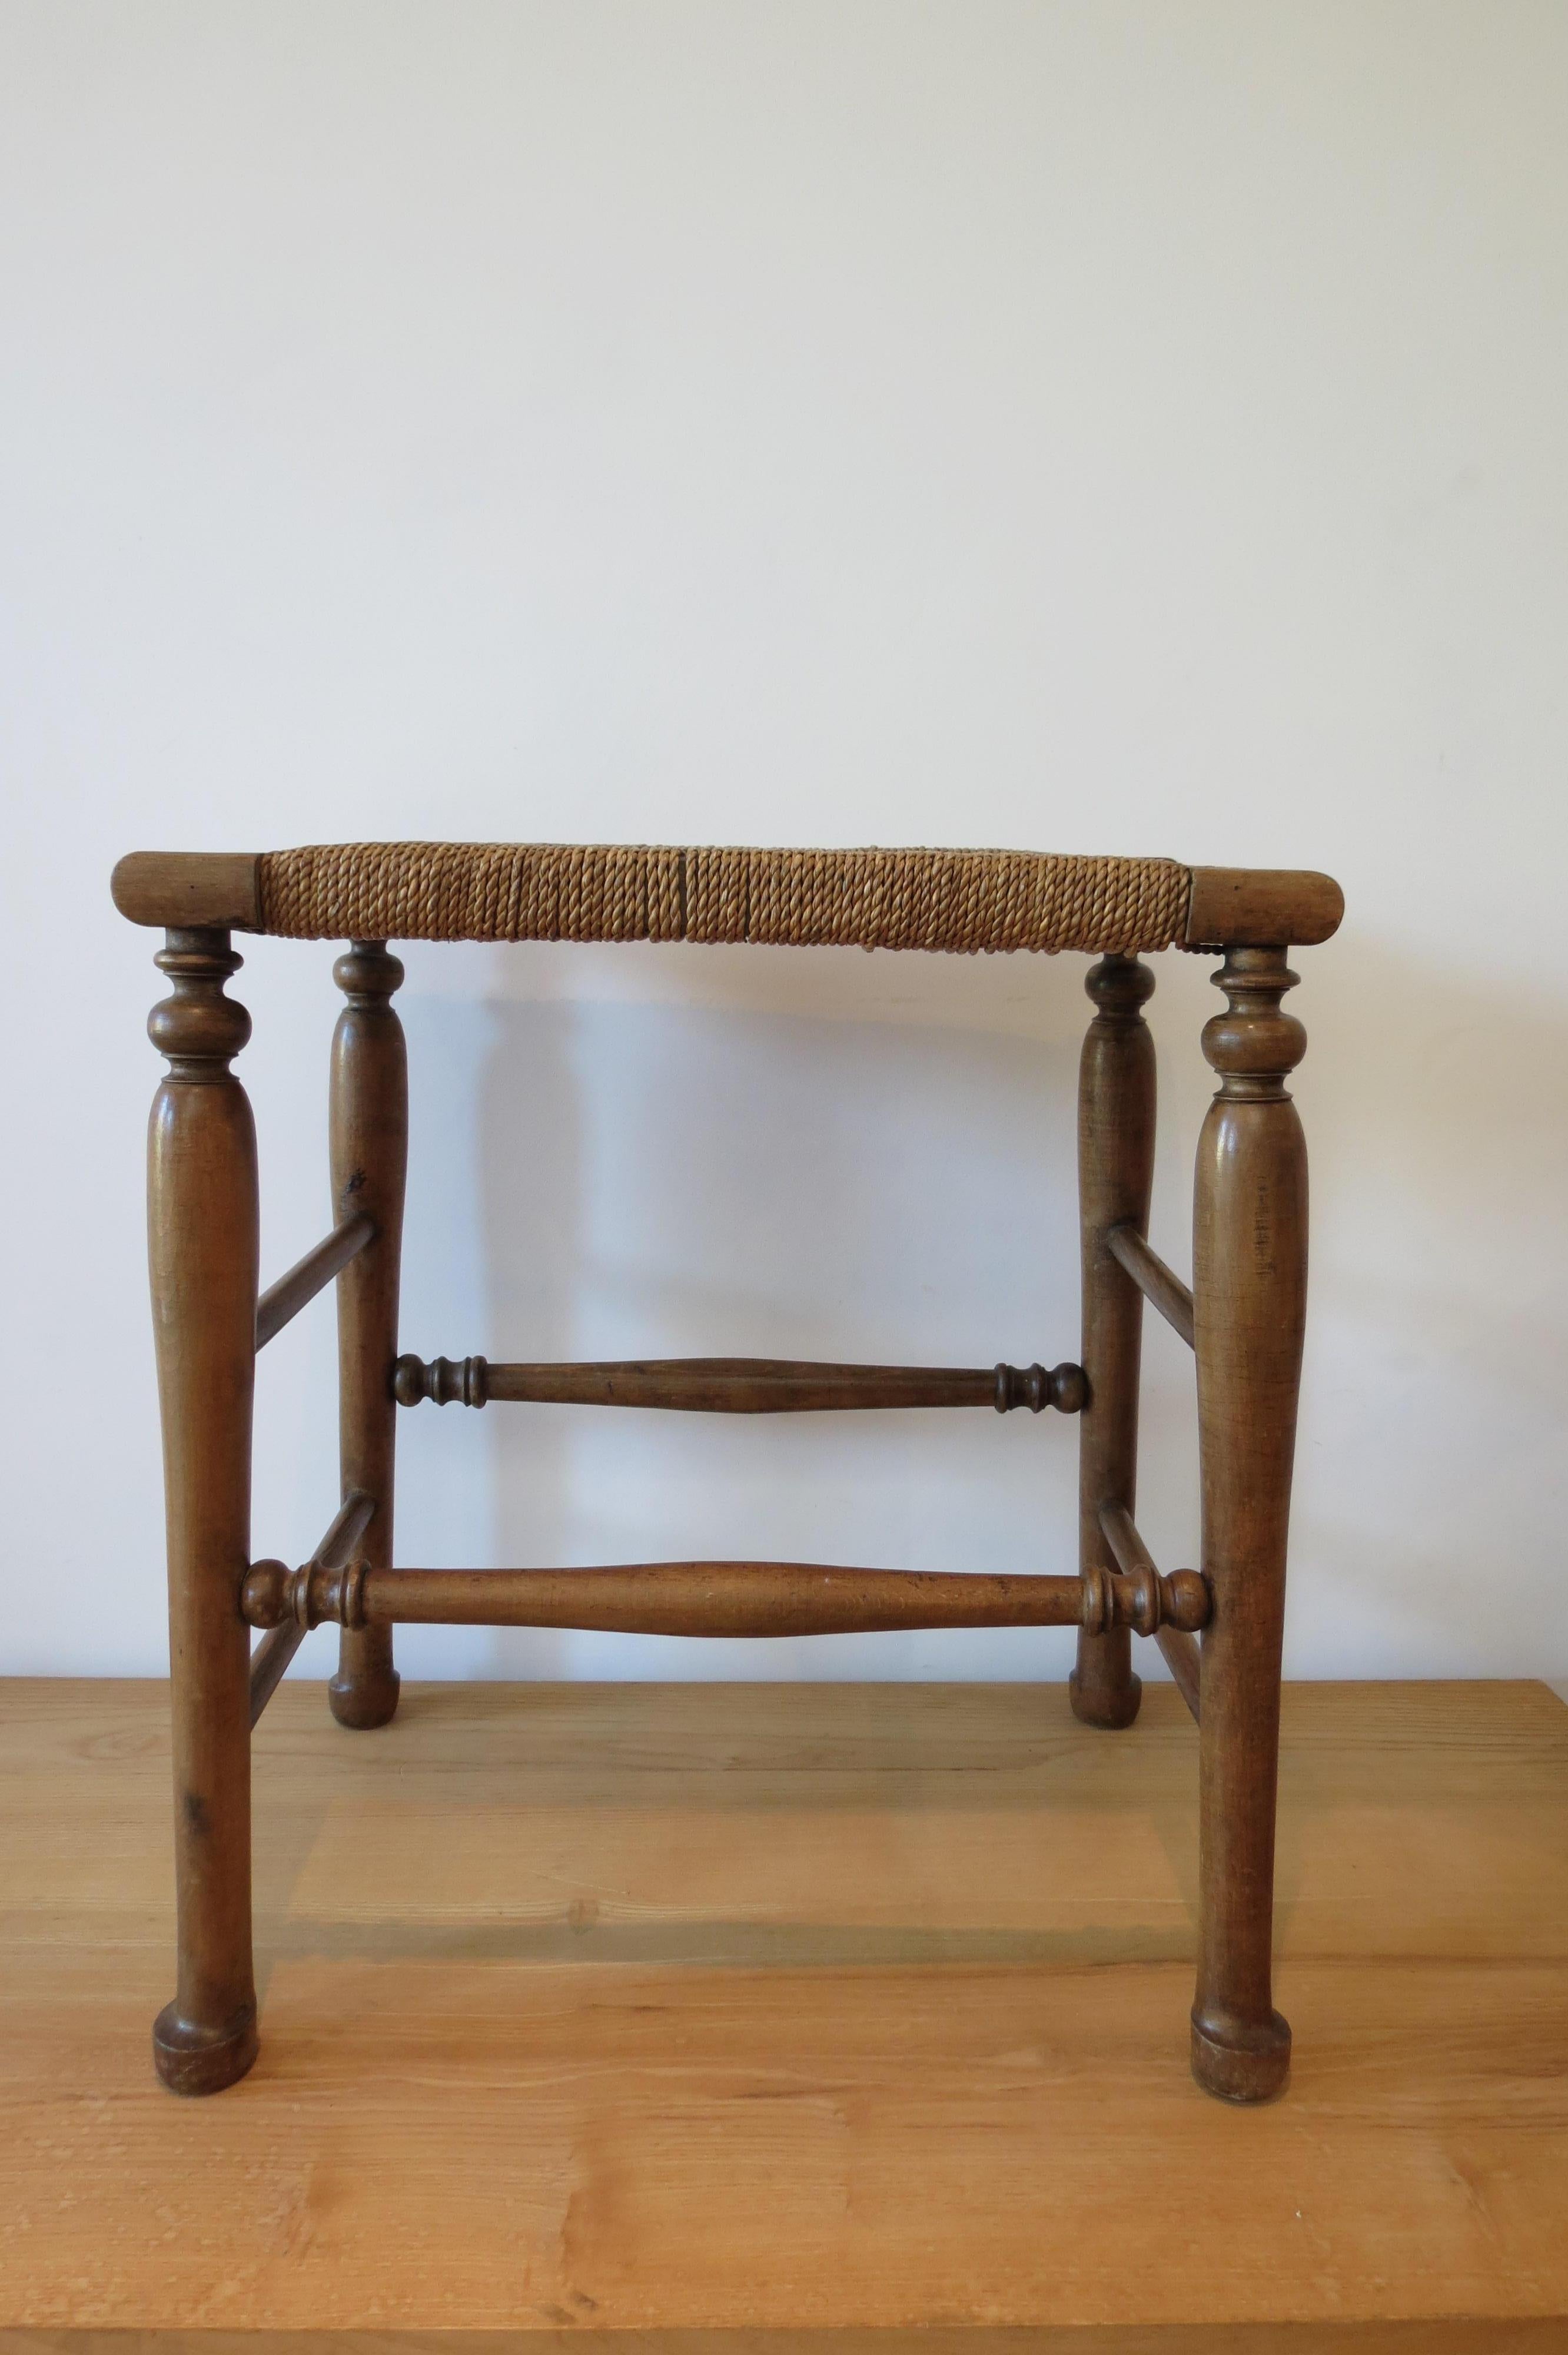 Country wooden stool, 1900s
A lovely country stool with turned legs and pad feet from the early 1900s. Made from solid Birch with woven cord seat. In good condition, with minimal wear to the seat.
Measures: 51cm W x 36cm D x 55cm tall. 

